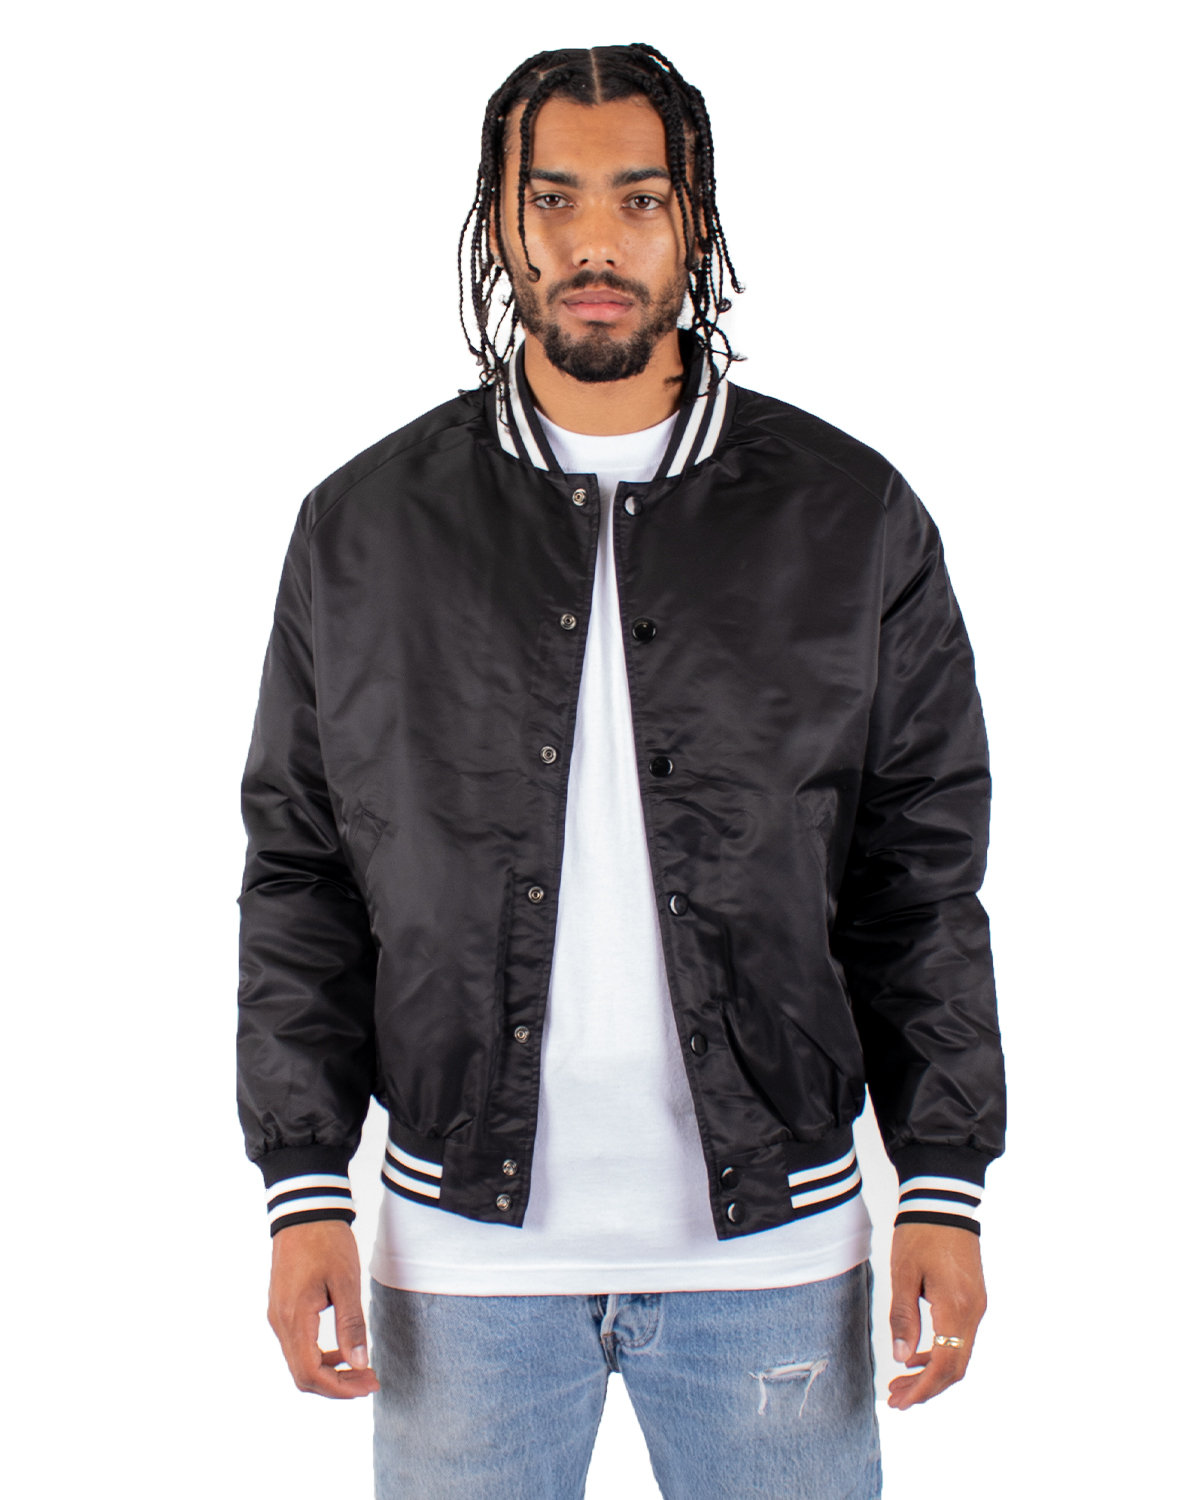 Polyester Fleece Lined Bomber Jacket with Adjustable Cuffs – Frontline  Innovation + Safety